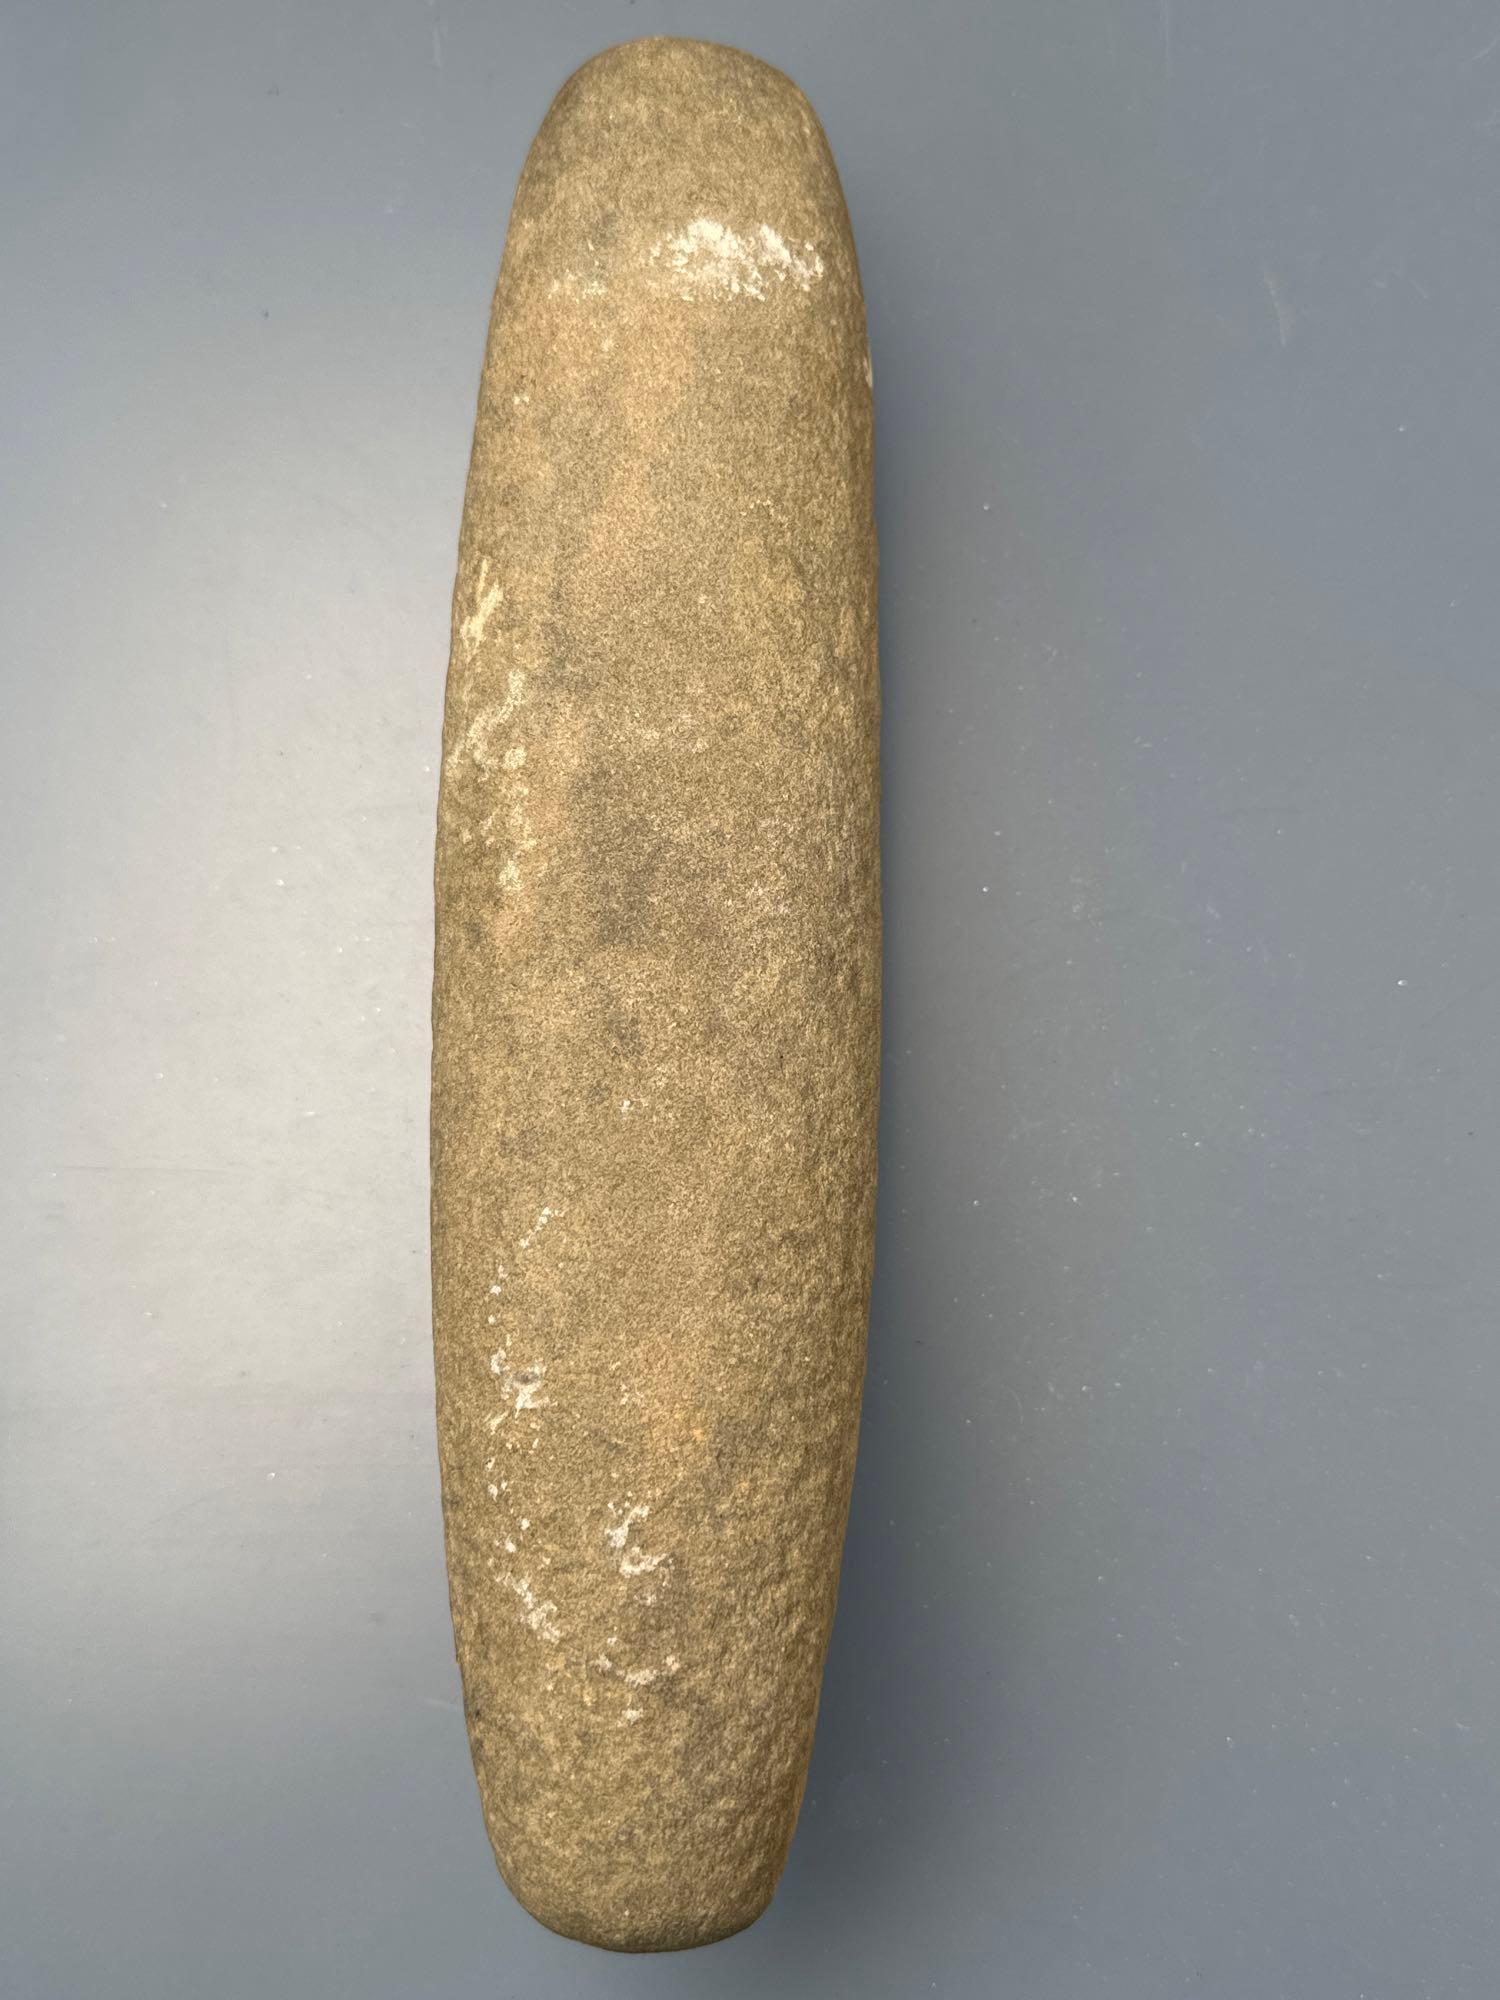 10 1/2" Roller Pestle, Found in Burlington Co., NJ, From an Early 1900's Collection